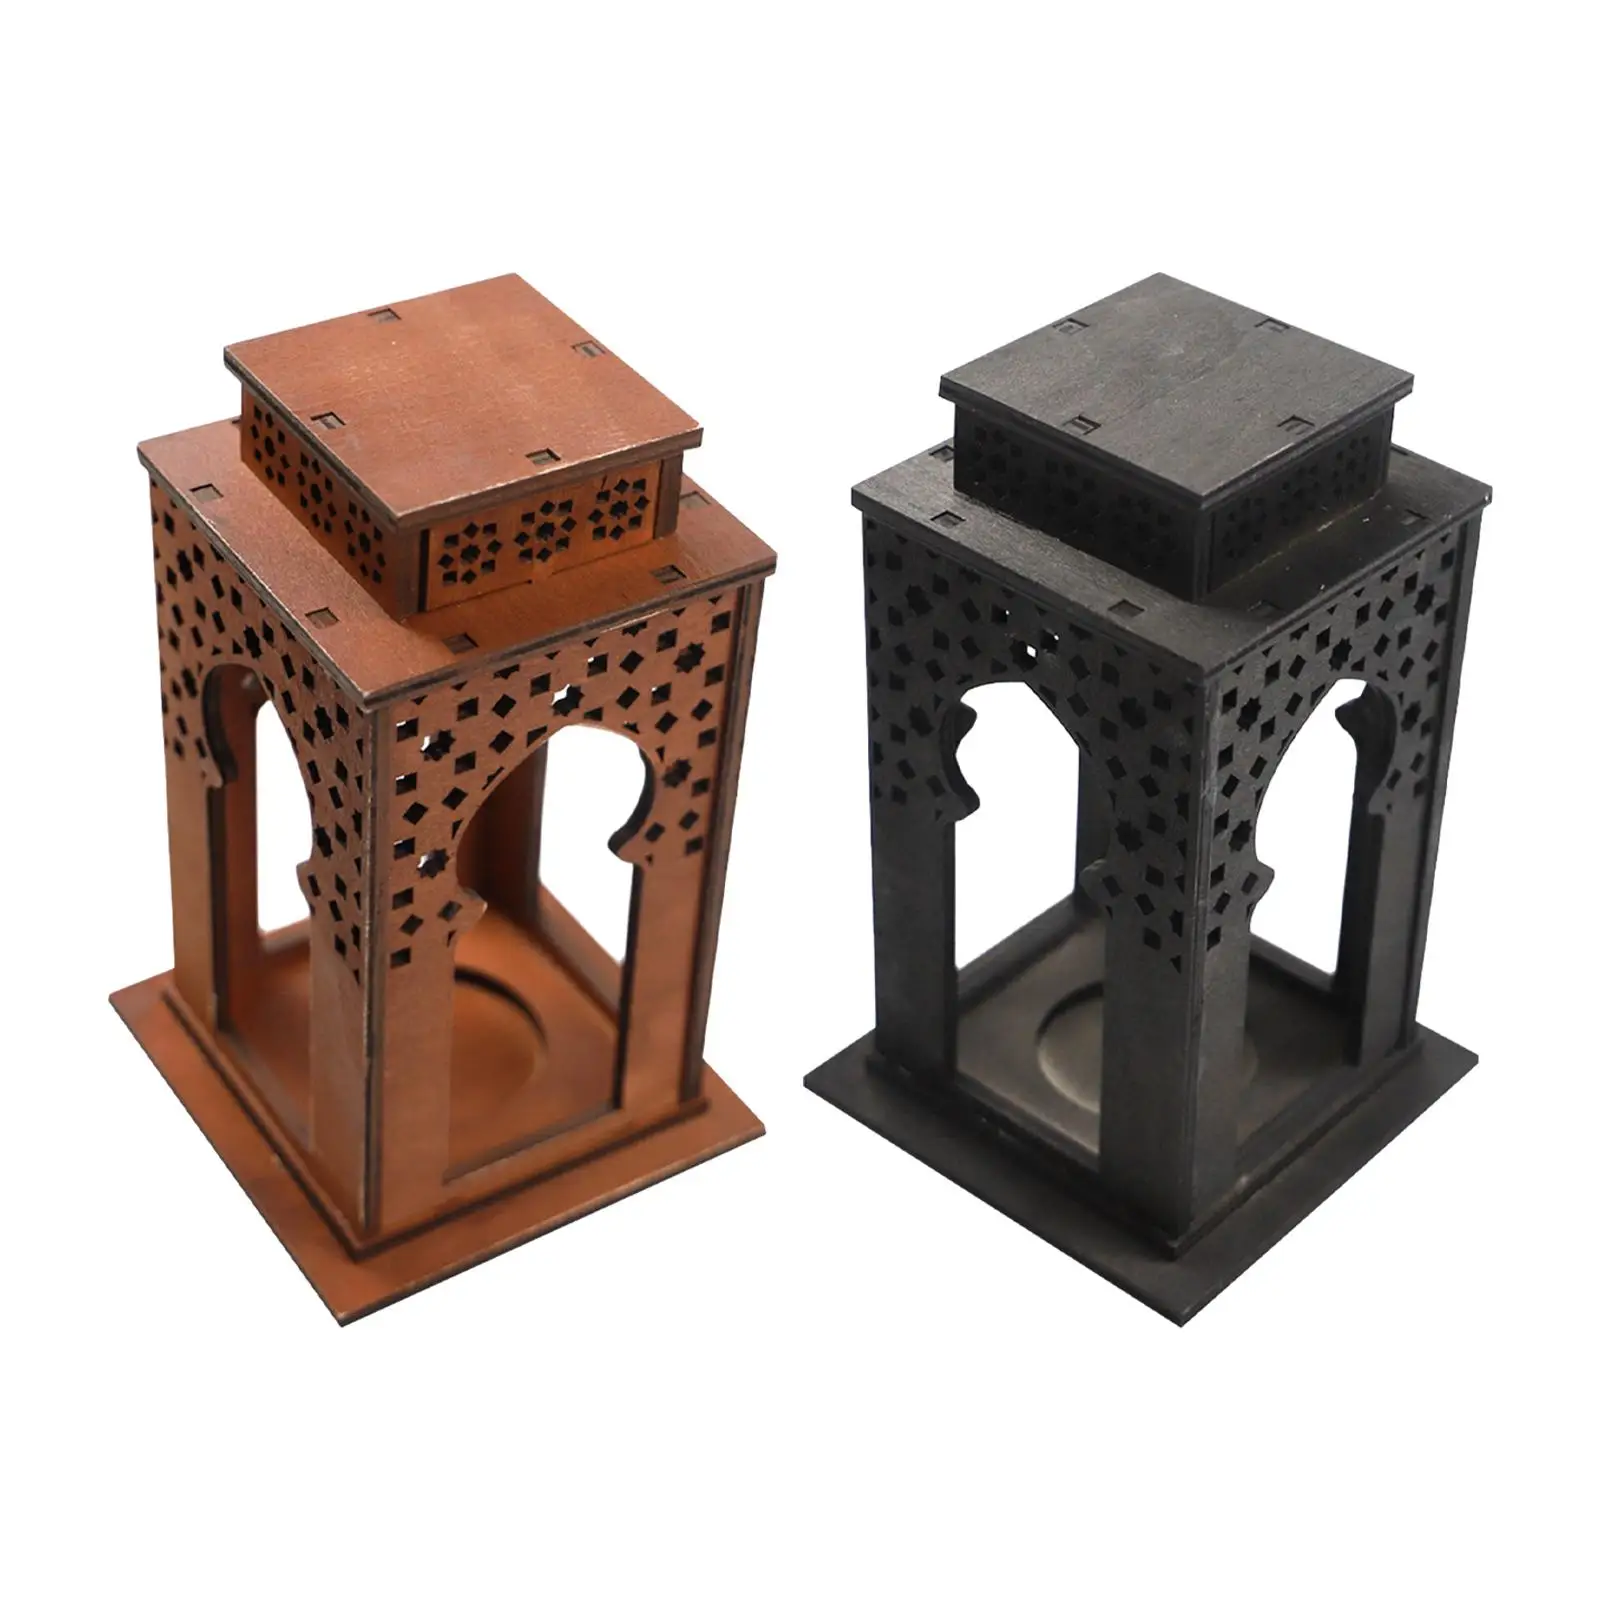 Candle Lantern Table Lantern Wooden Candle Holder Table Decoration for Indoor Outdoor